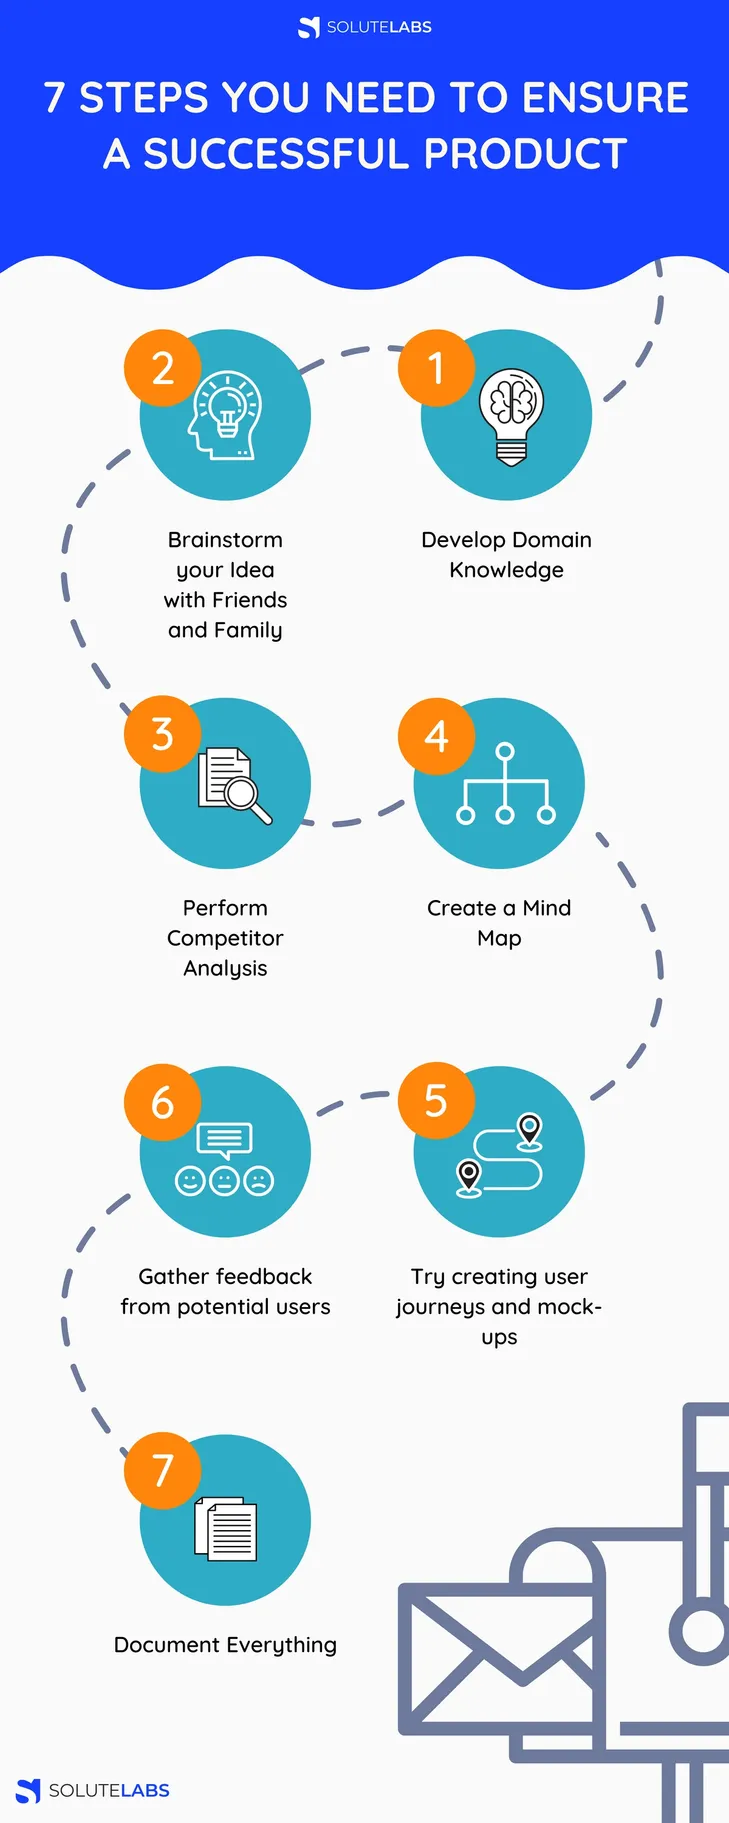 7 Steps You Need To Ensure a Successful Product [Infographic]